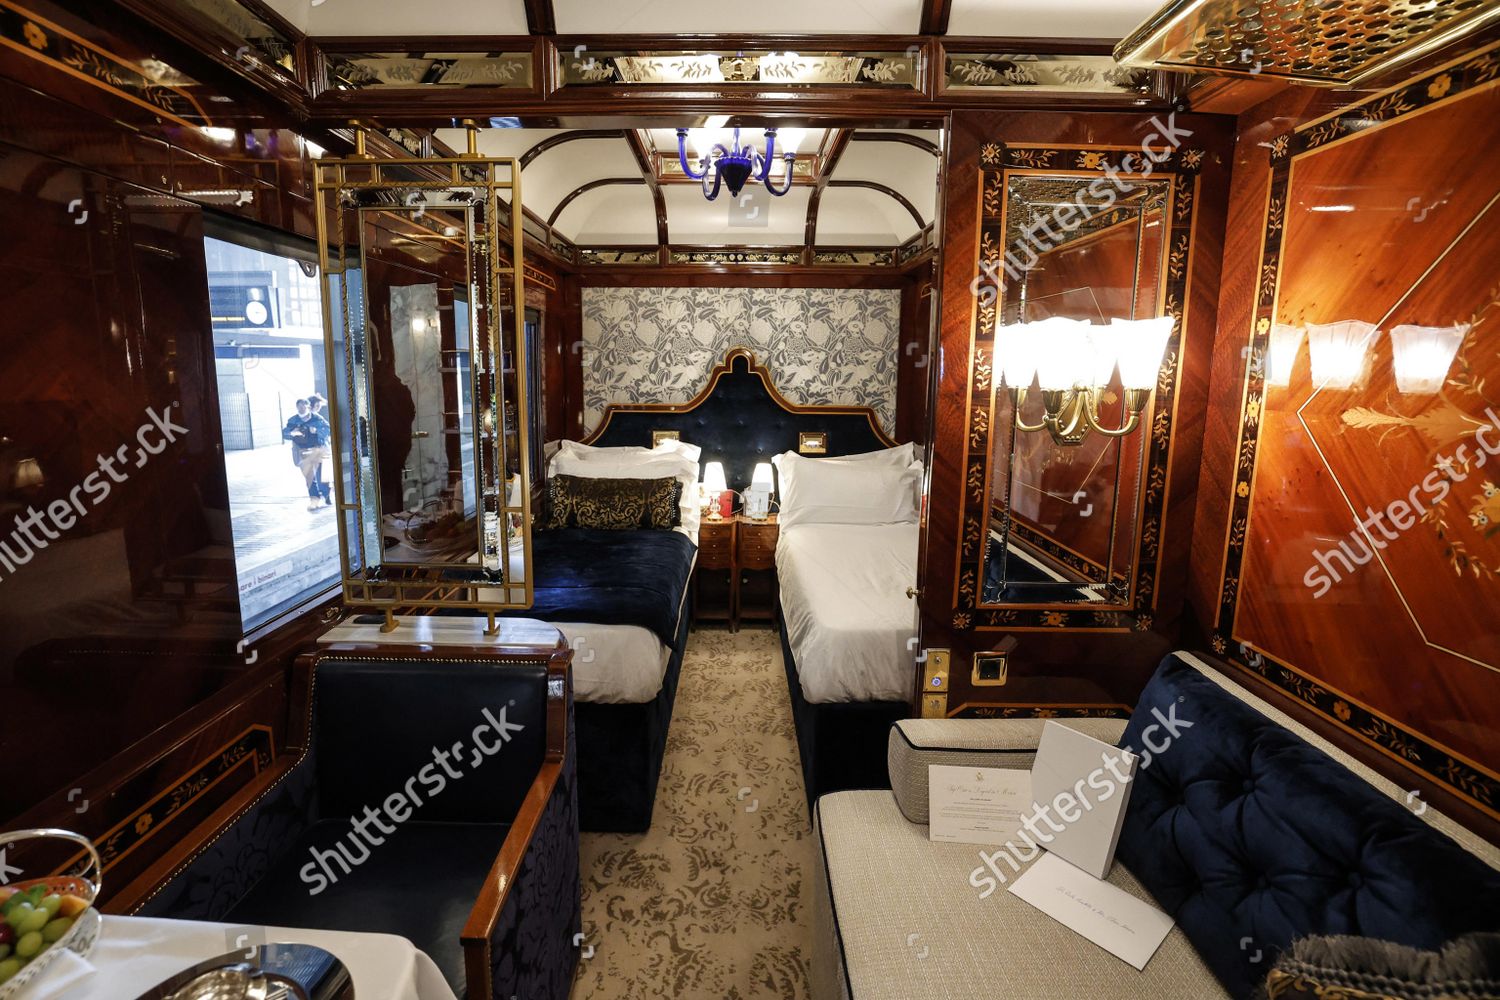 Images of the Venice Simplon-Orient-Express